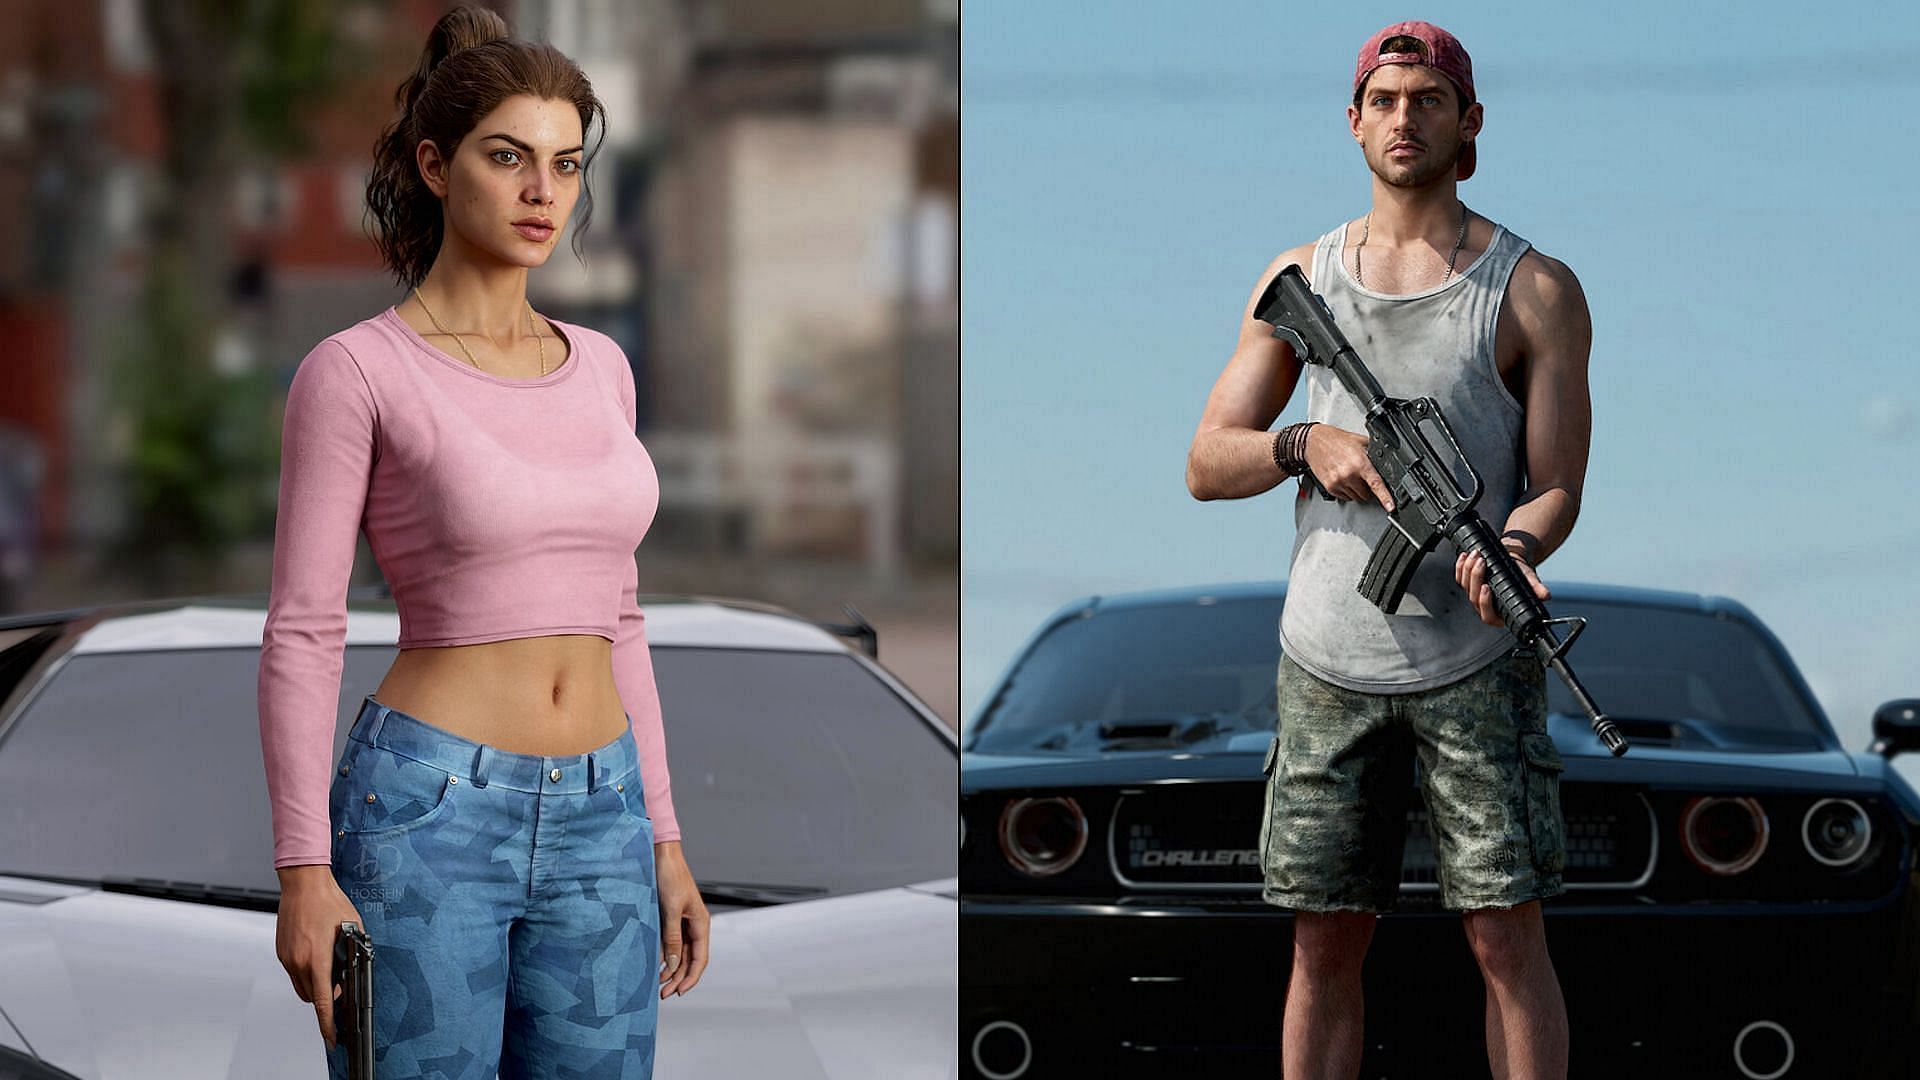 Alleged Gta Lucia And Jason Actors Continue To Tease On Instagram Fans Go Crazy